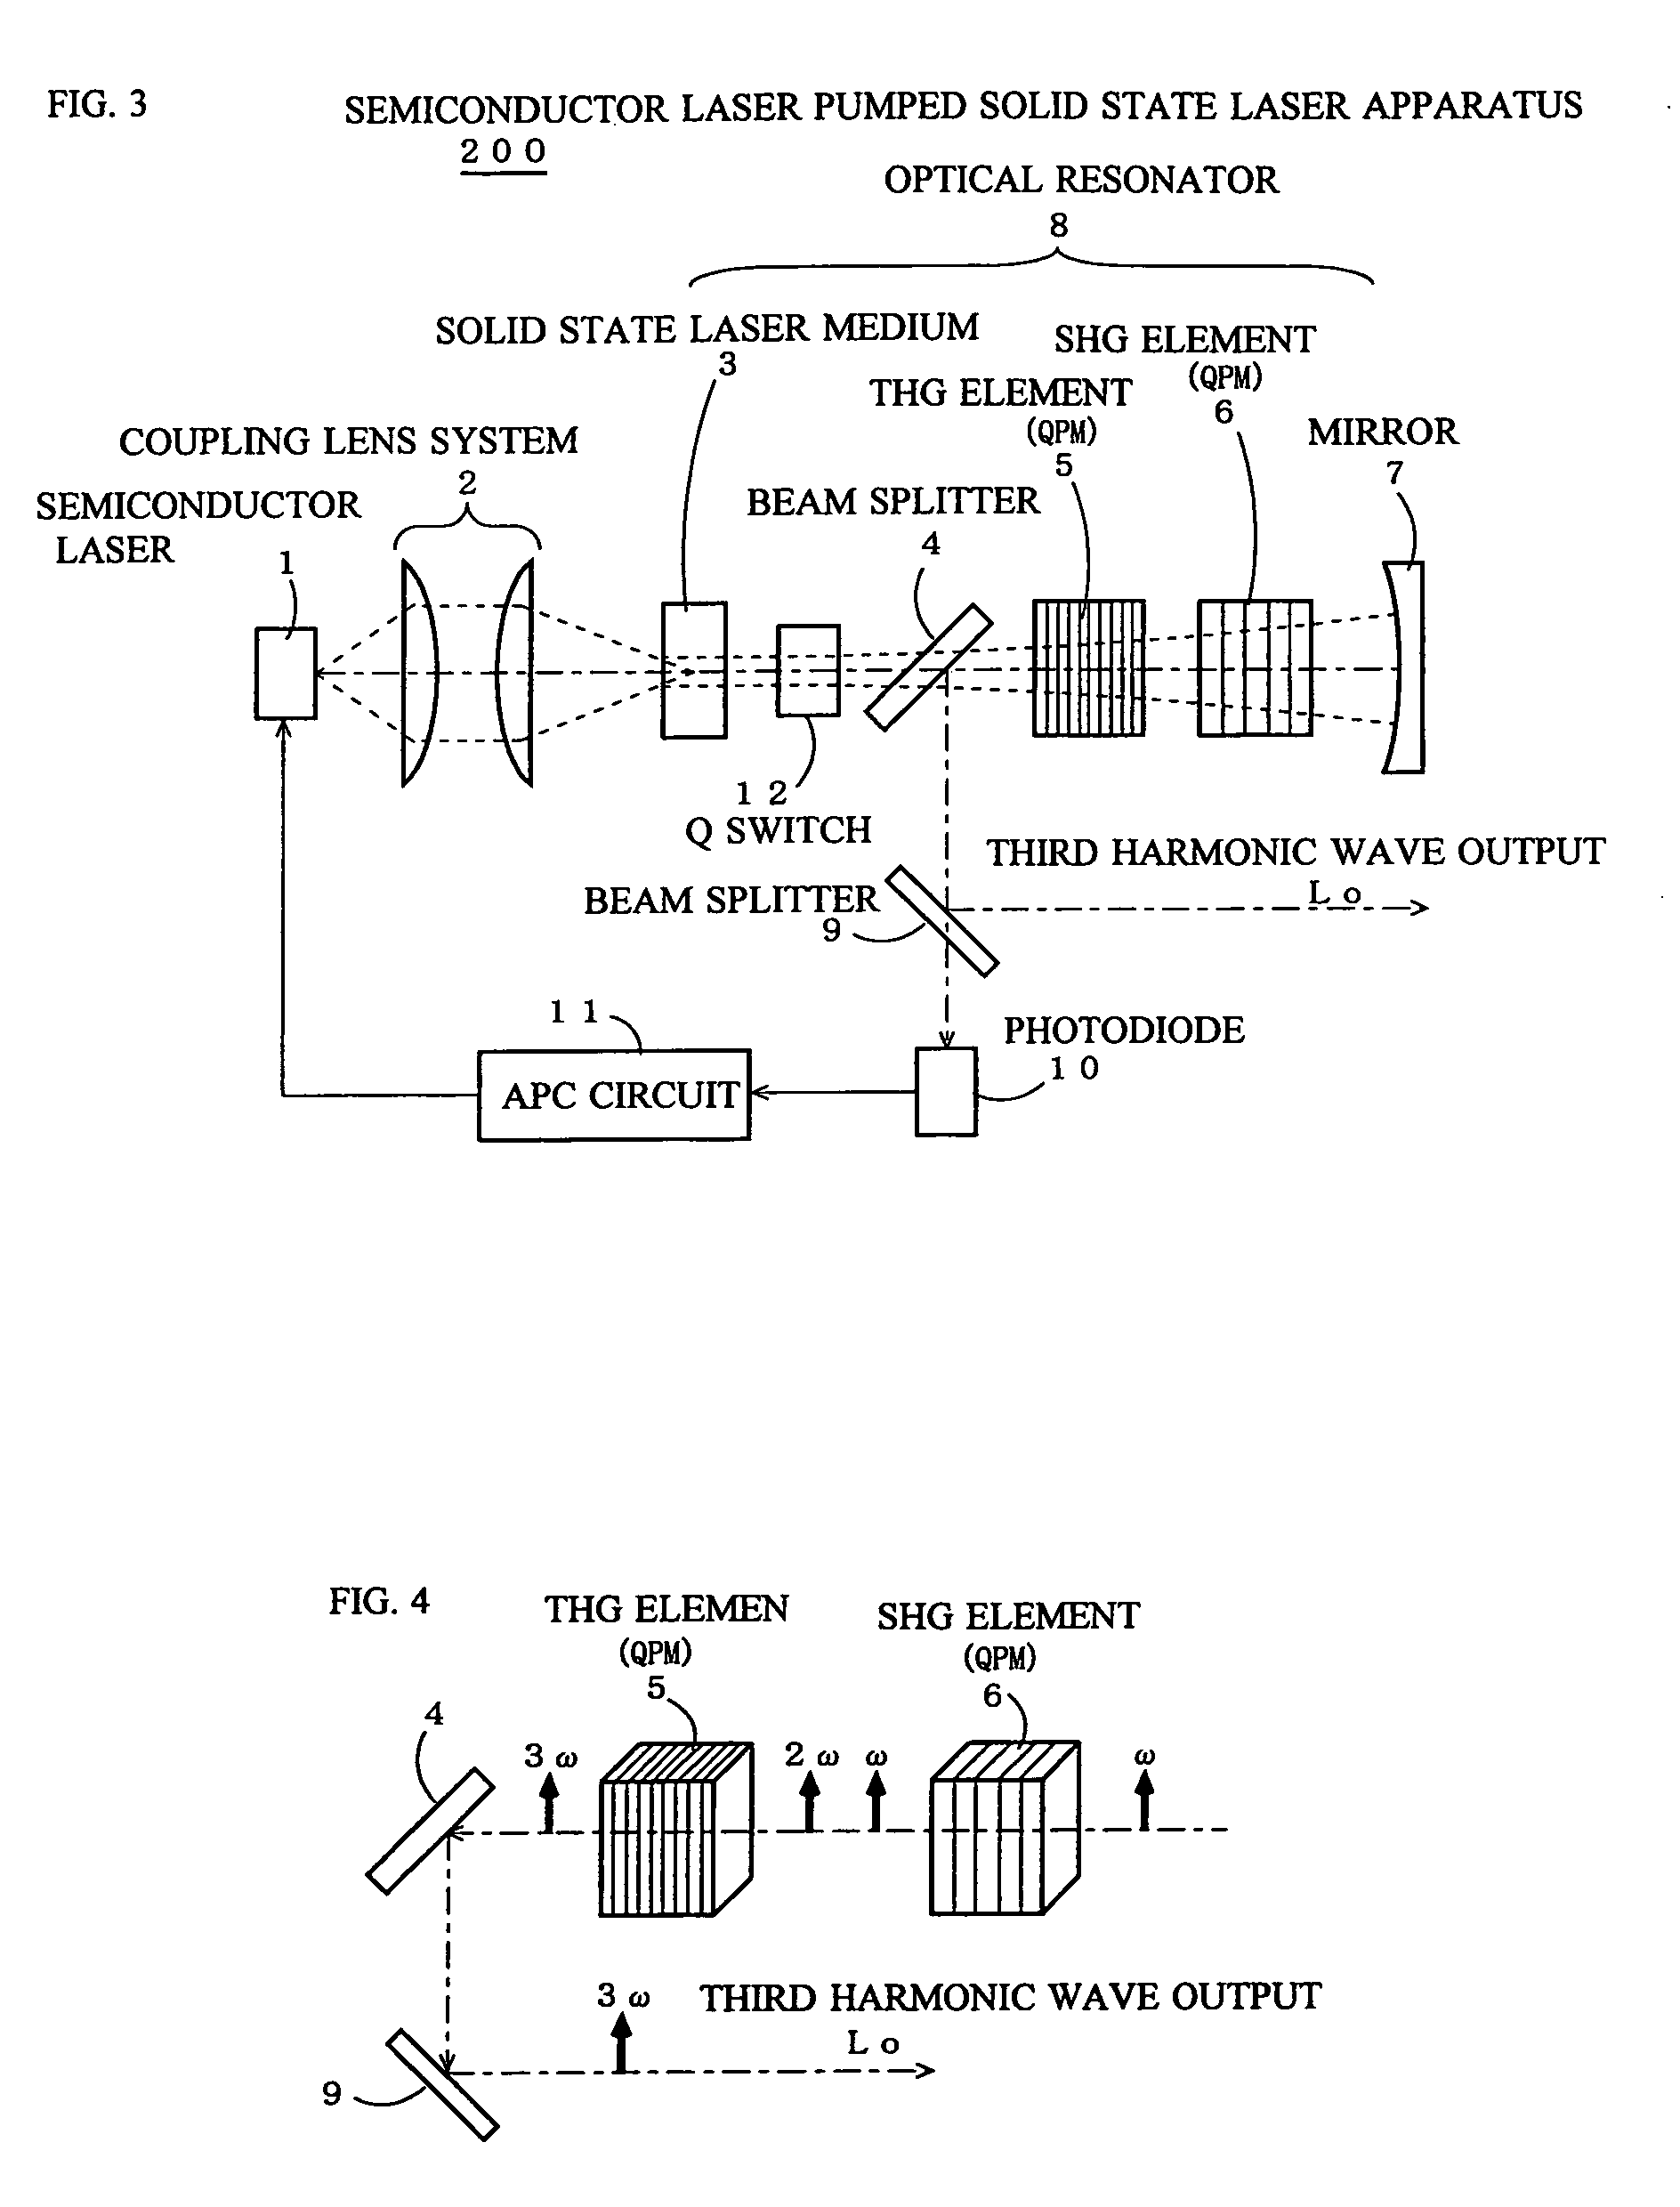 Semiconductor laser excited solid-state laser device